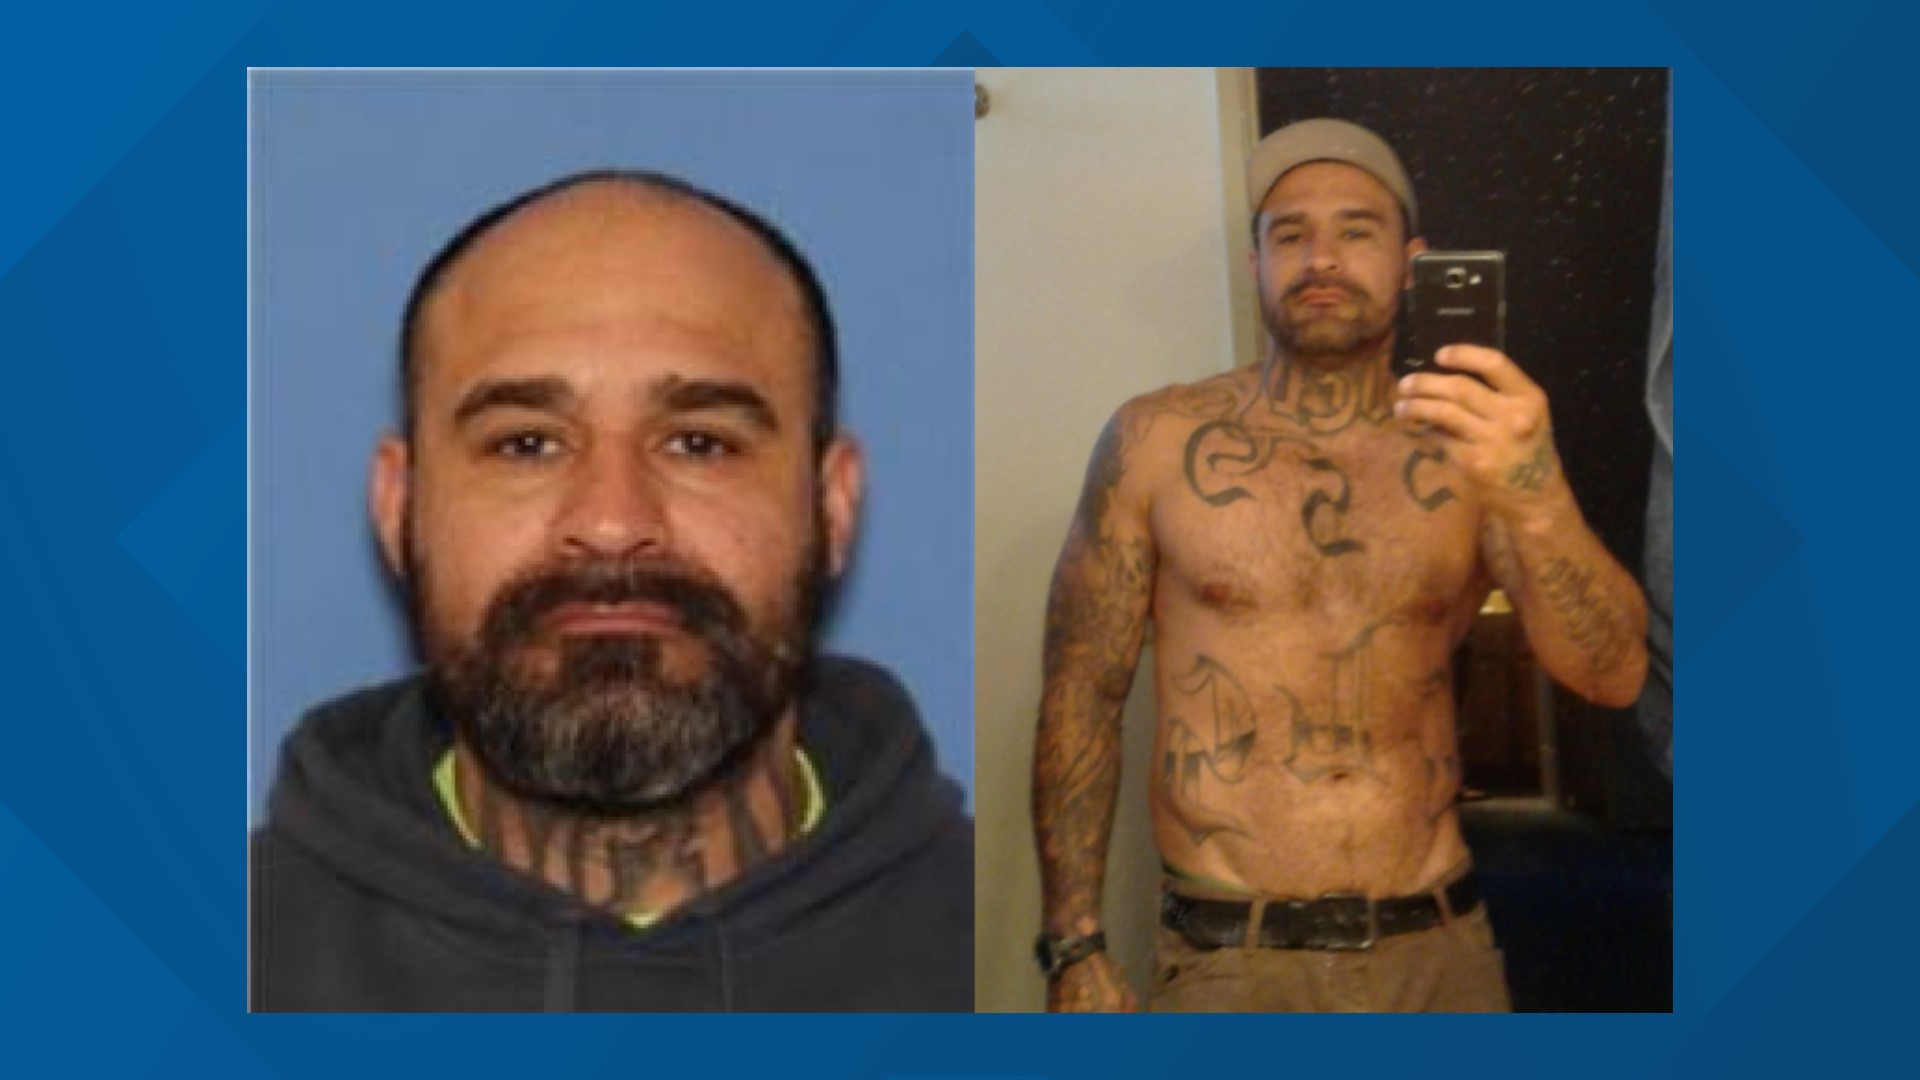 A woman later identified as Kathryn Muhlbach, 27, was found dead Dec. 9. Jose Antonio Caraballo, 43, is on the run and wanted for her murder, police said.